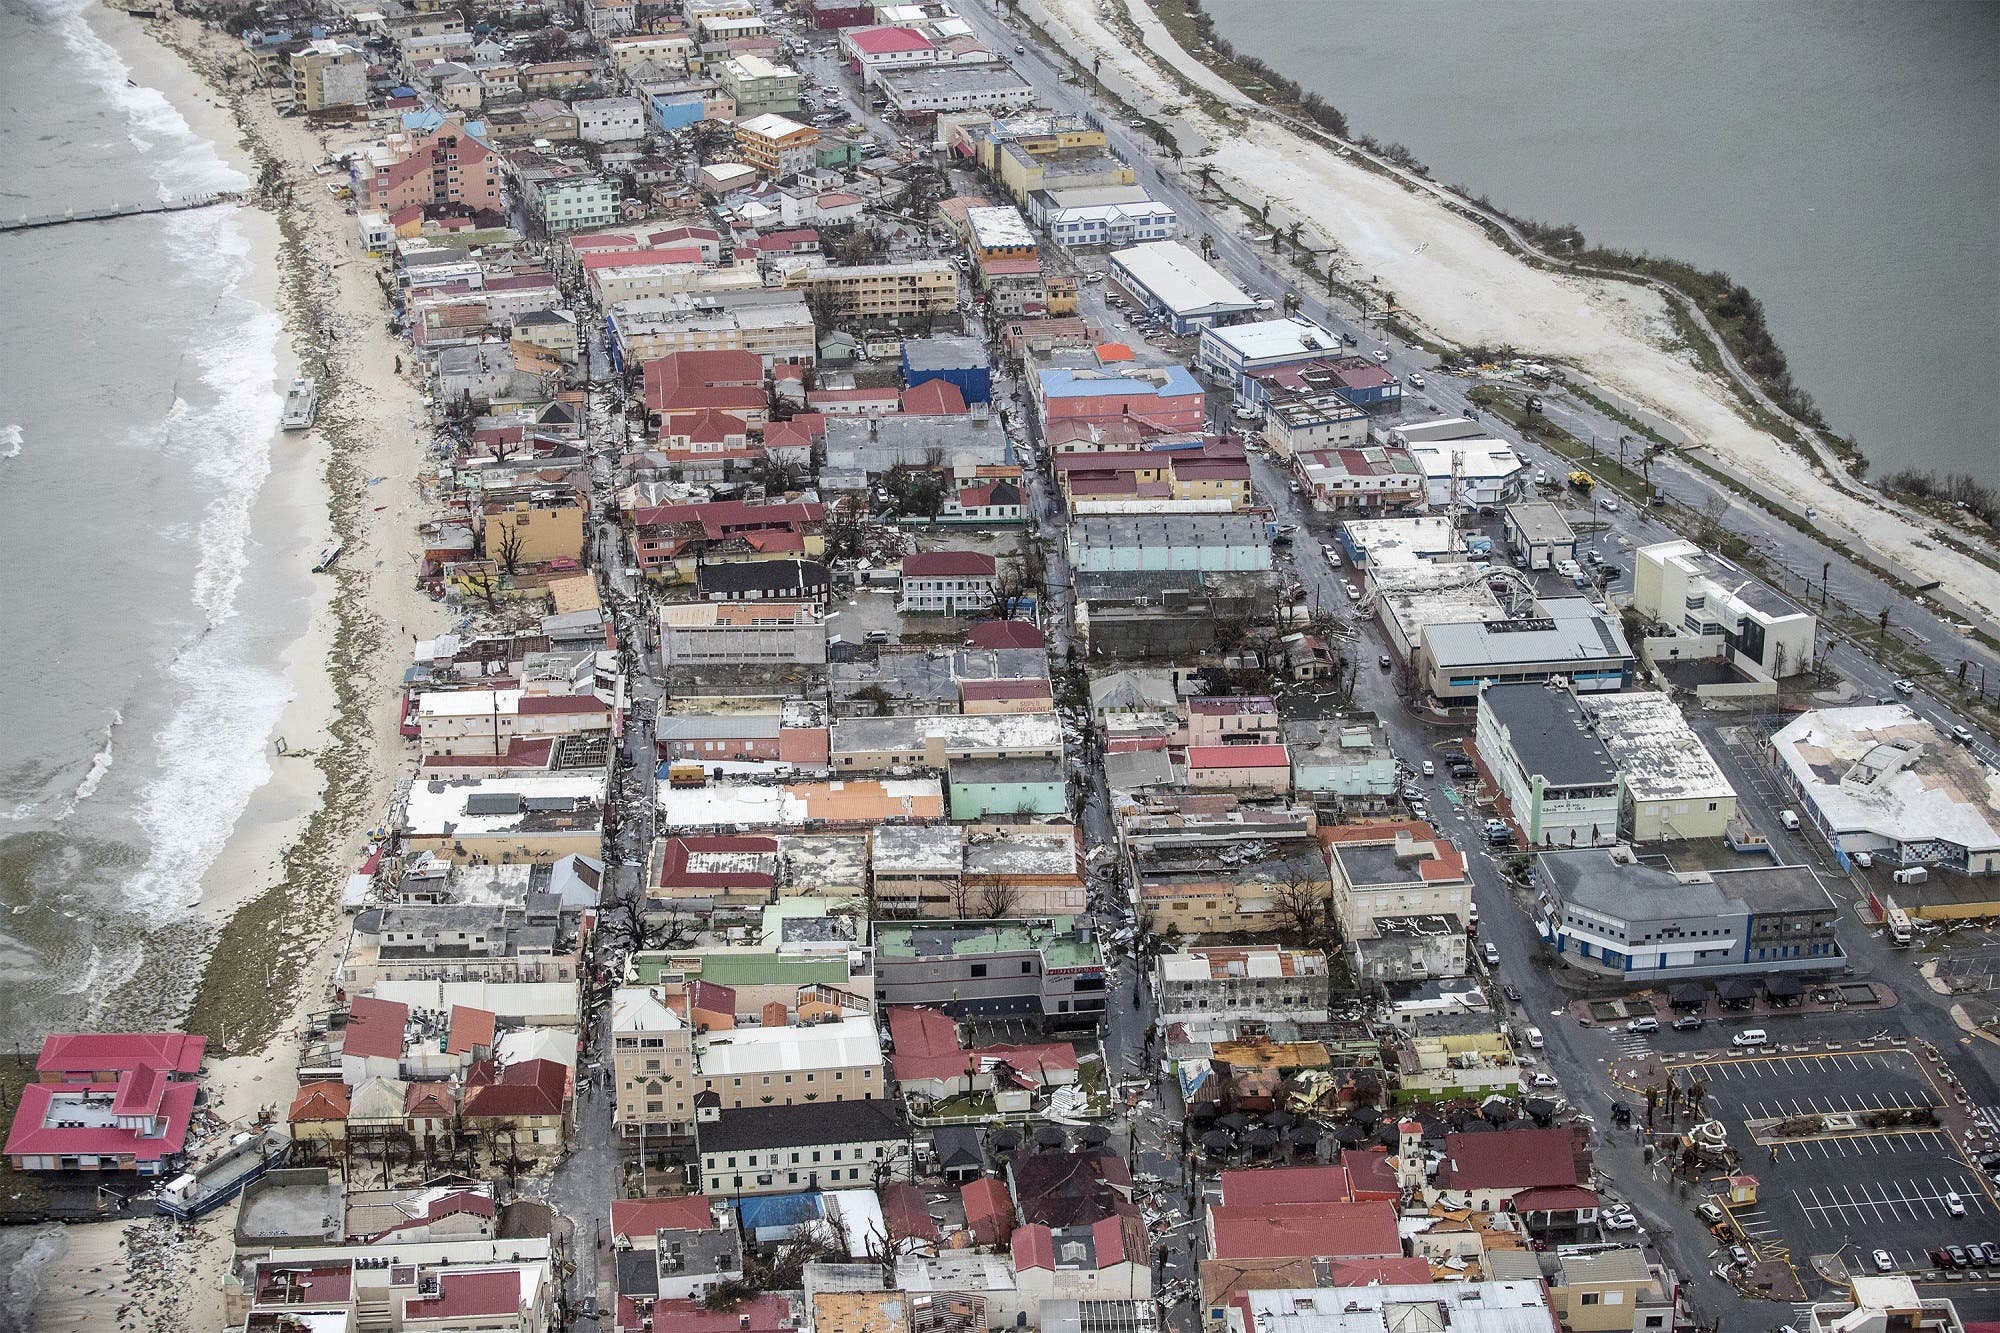 An aerial photograph released by the Dutch department of Defense on September 6, 2017 shows the damage of Hurricane Irma in Philipsburg, on the Dutch Caribbean island of Sint Maarten. (AFP)